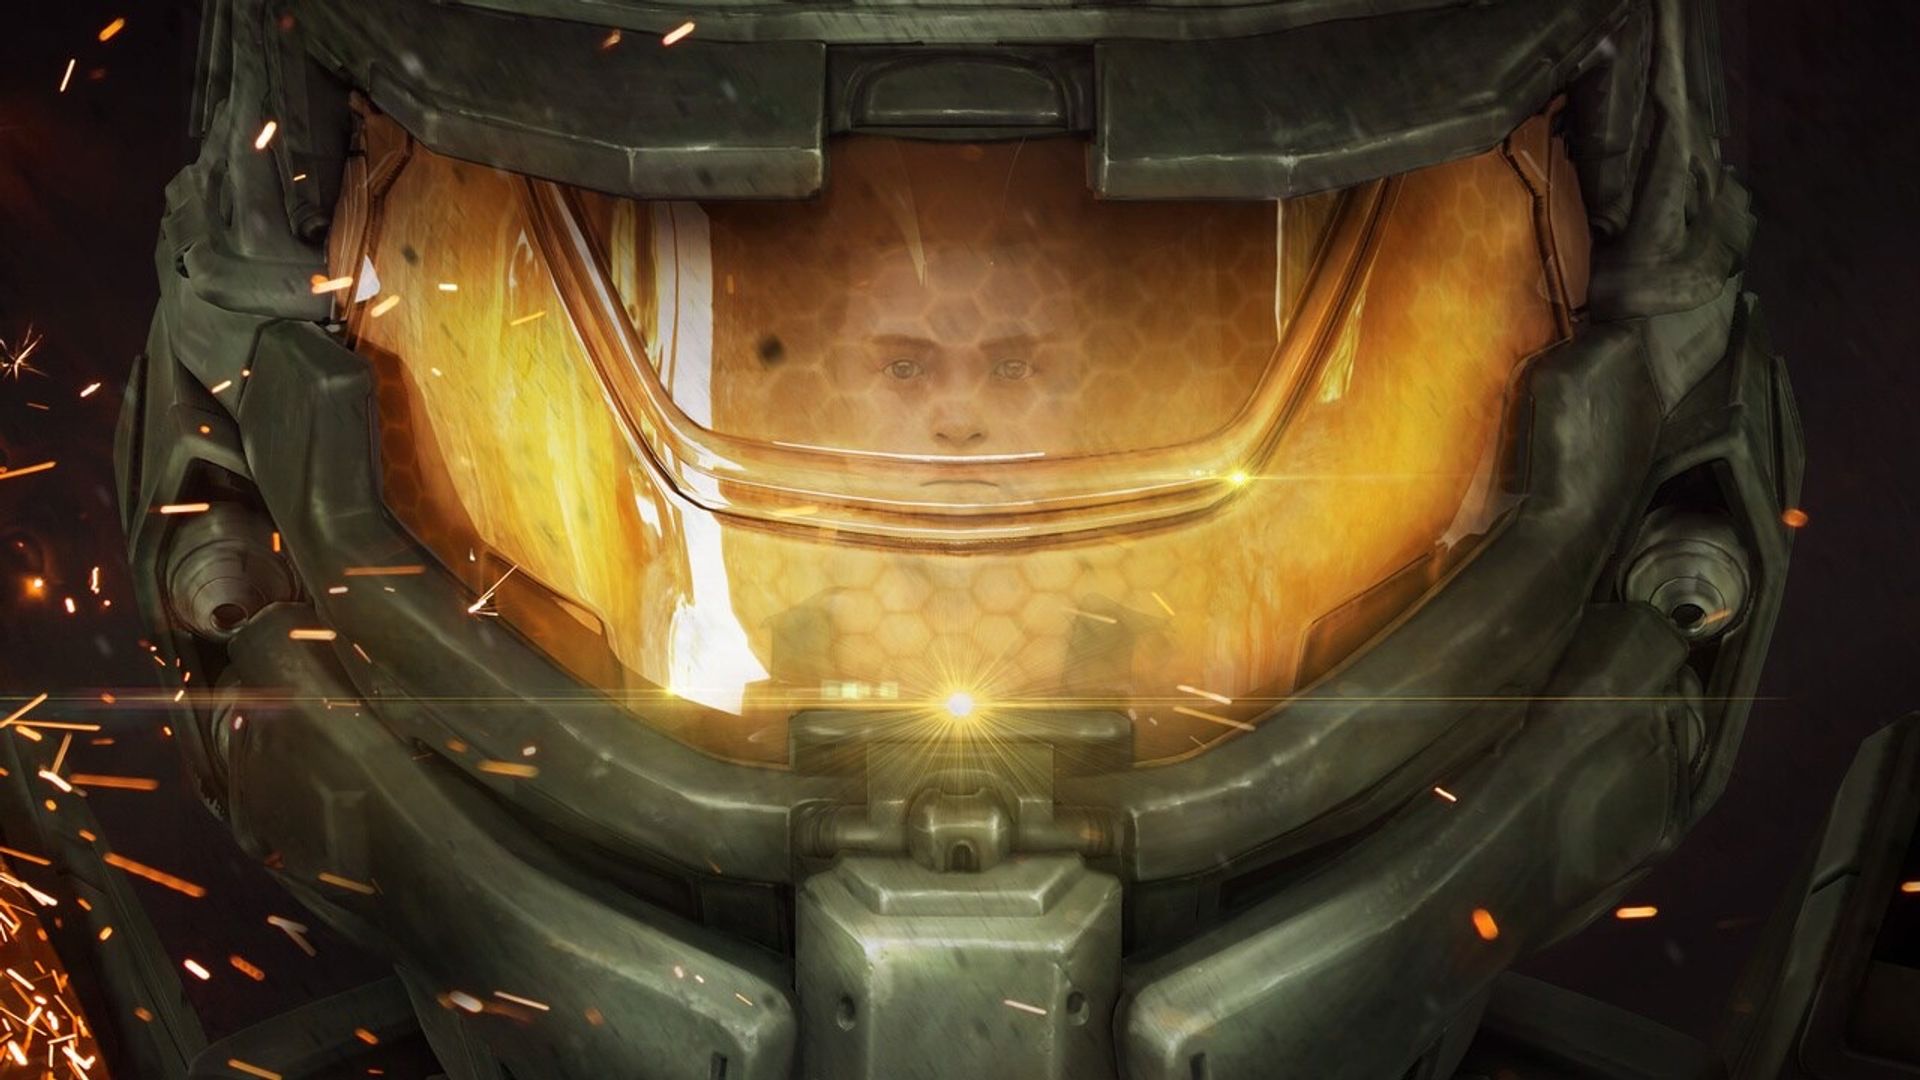 Halo' Season 1 Release Schedule: Episode Dates and Times